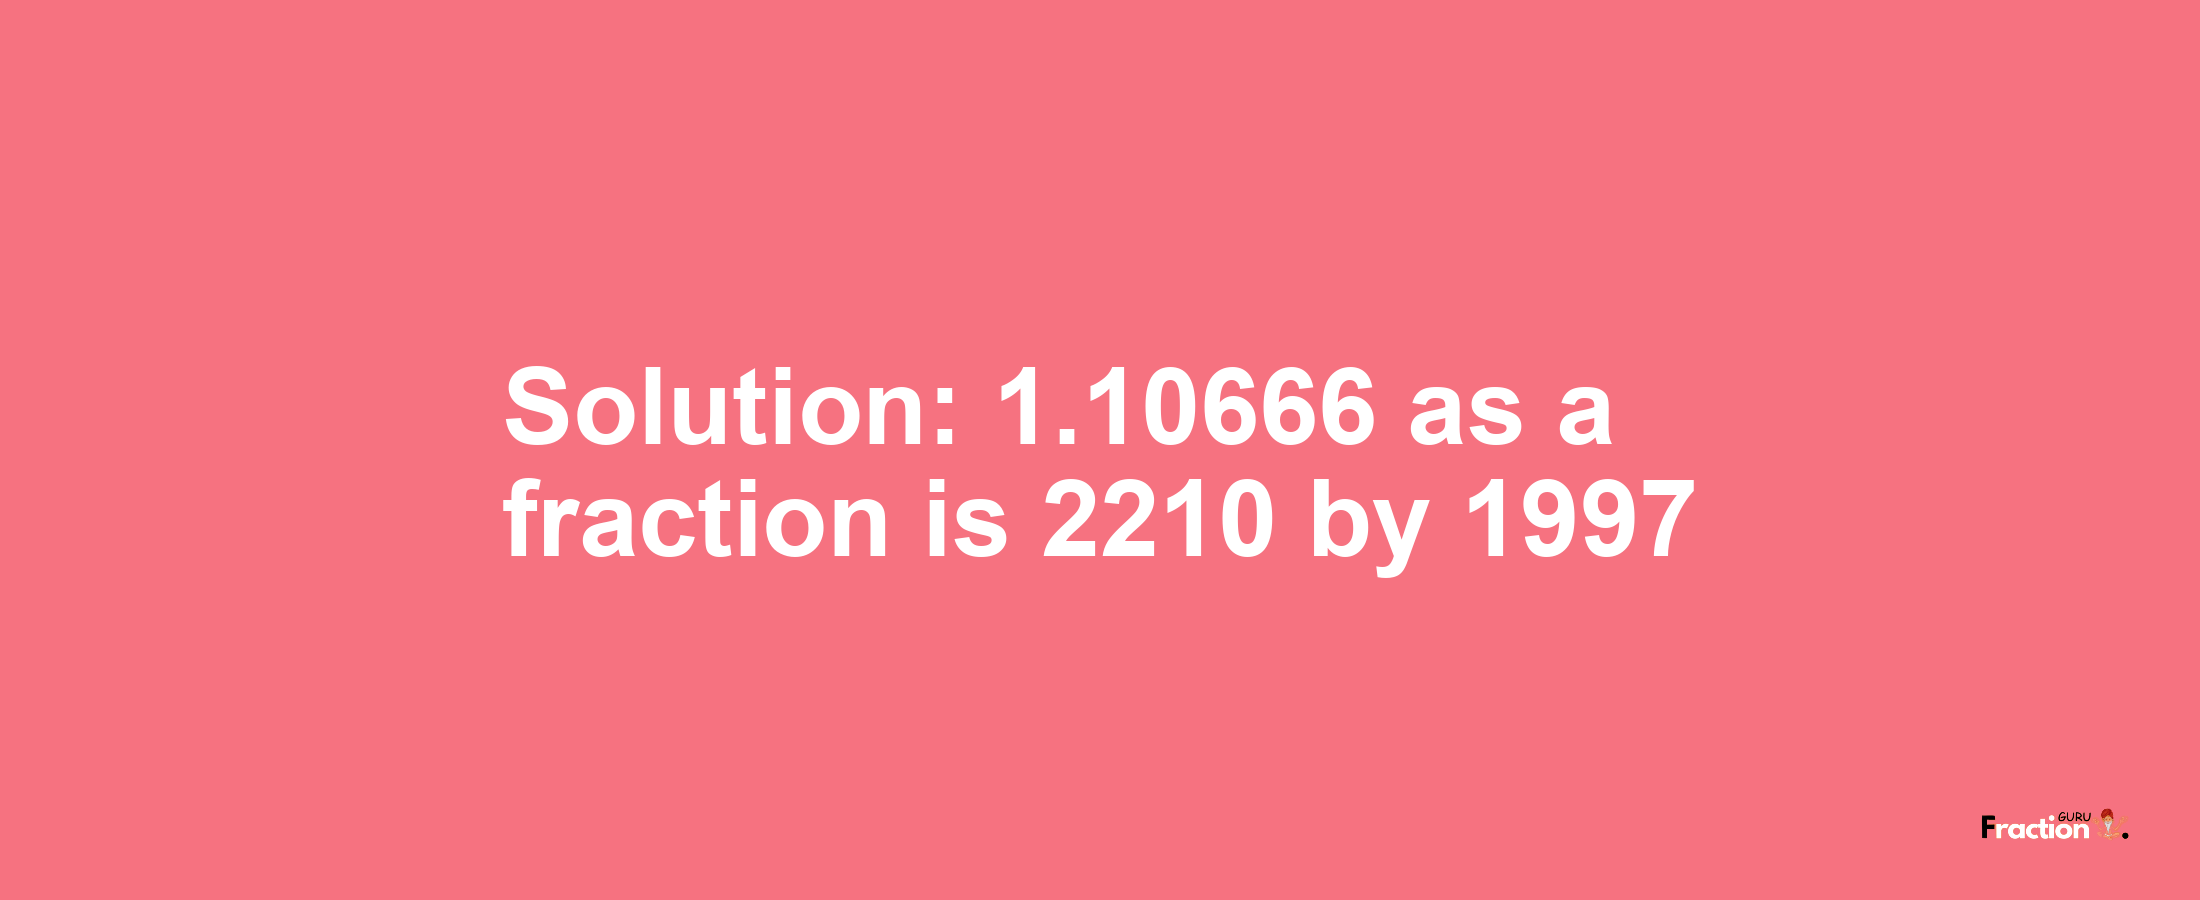 Solution:1.10666 as a fraction is 2210/1997